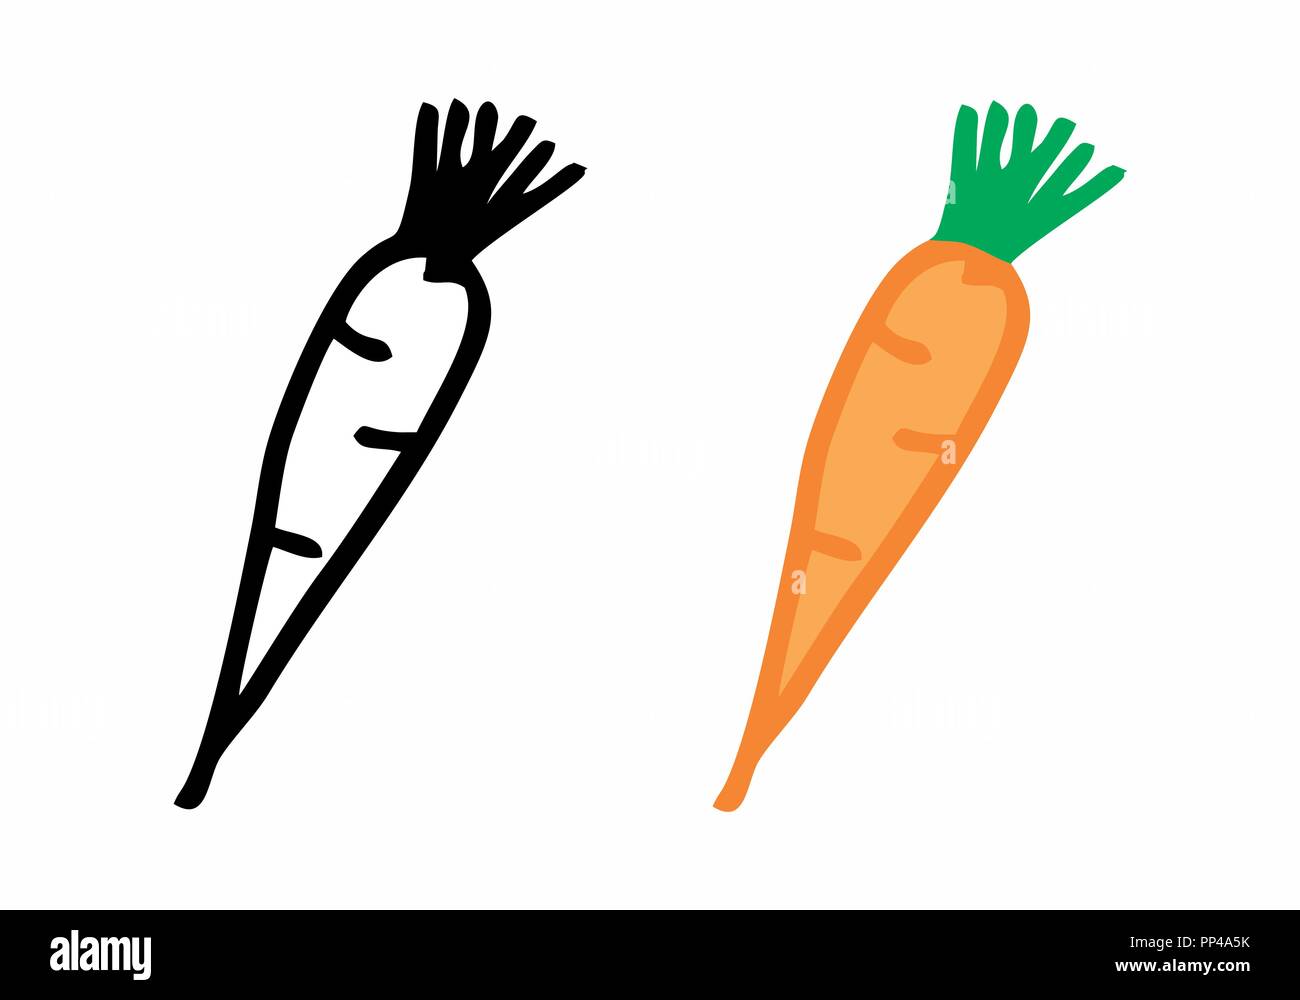 Freehand illustration of black and colorful carrots Stock Vector